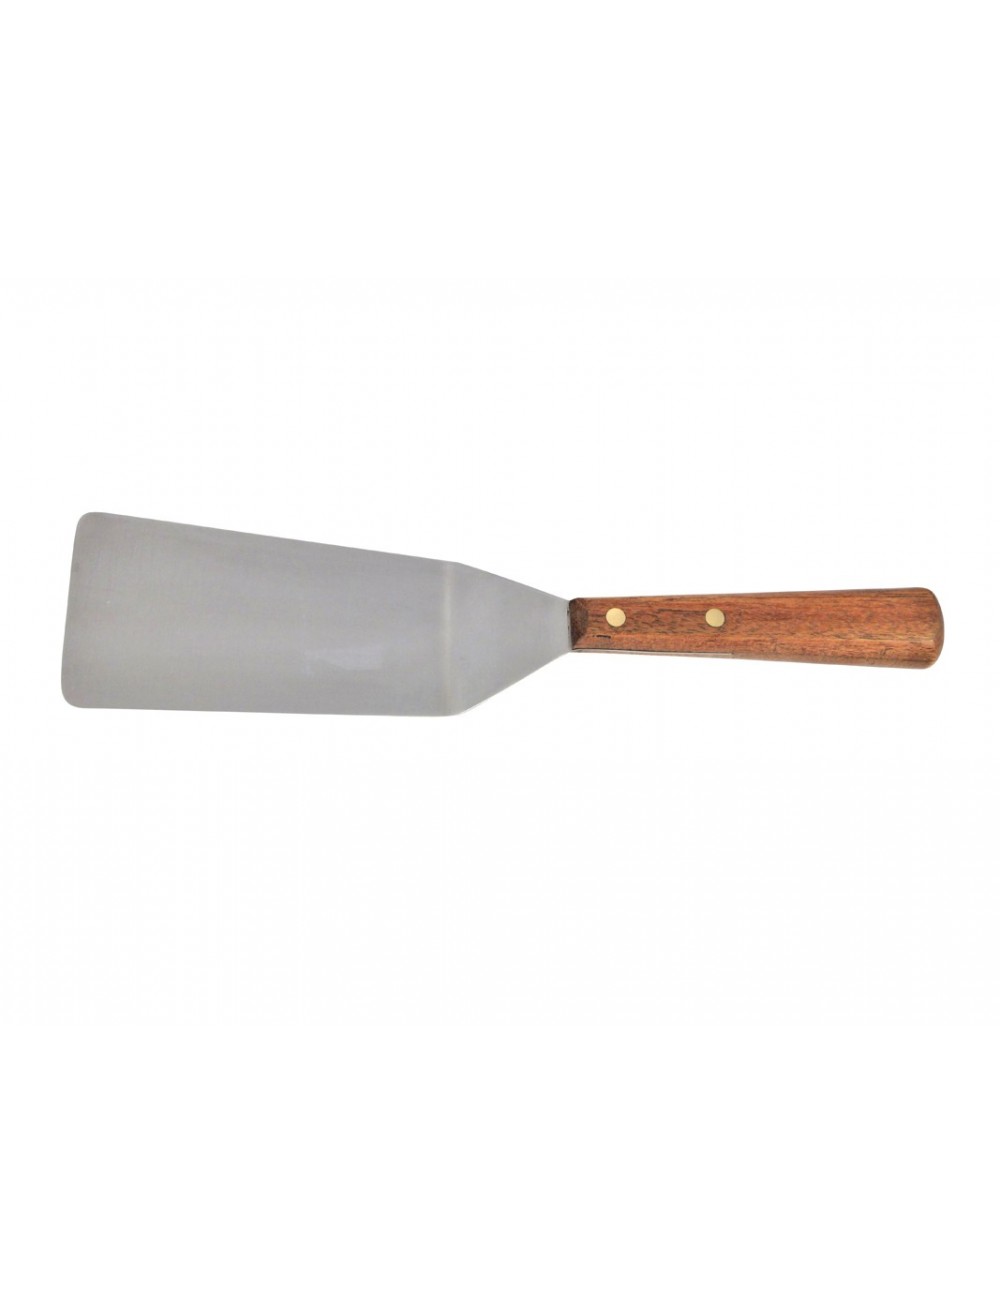 STAINLESS STEEL CURVED SPATULA - PURCHASE OF